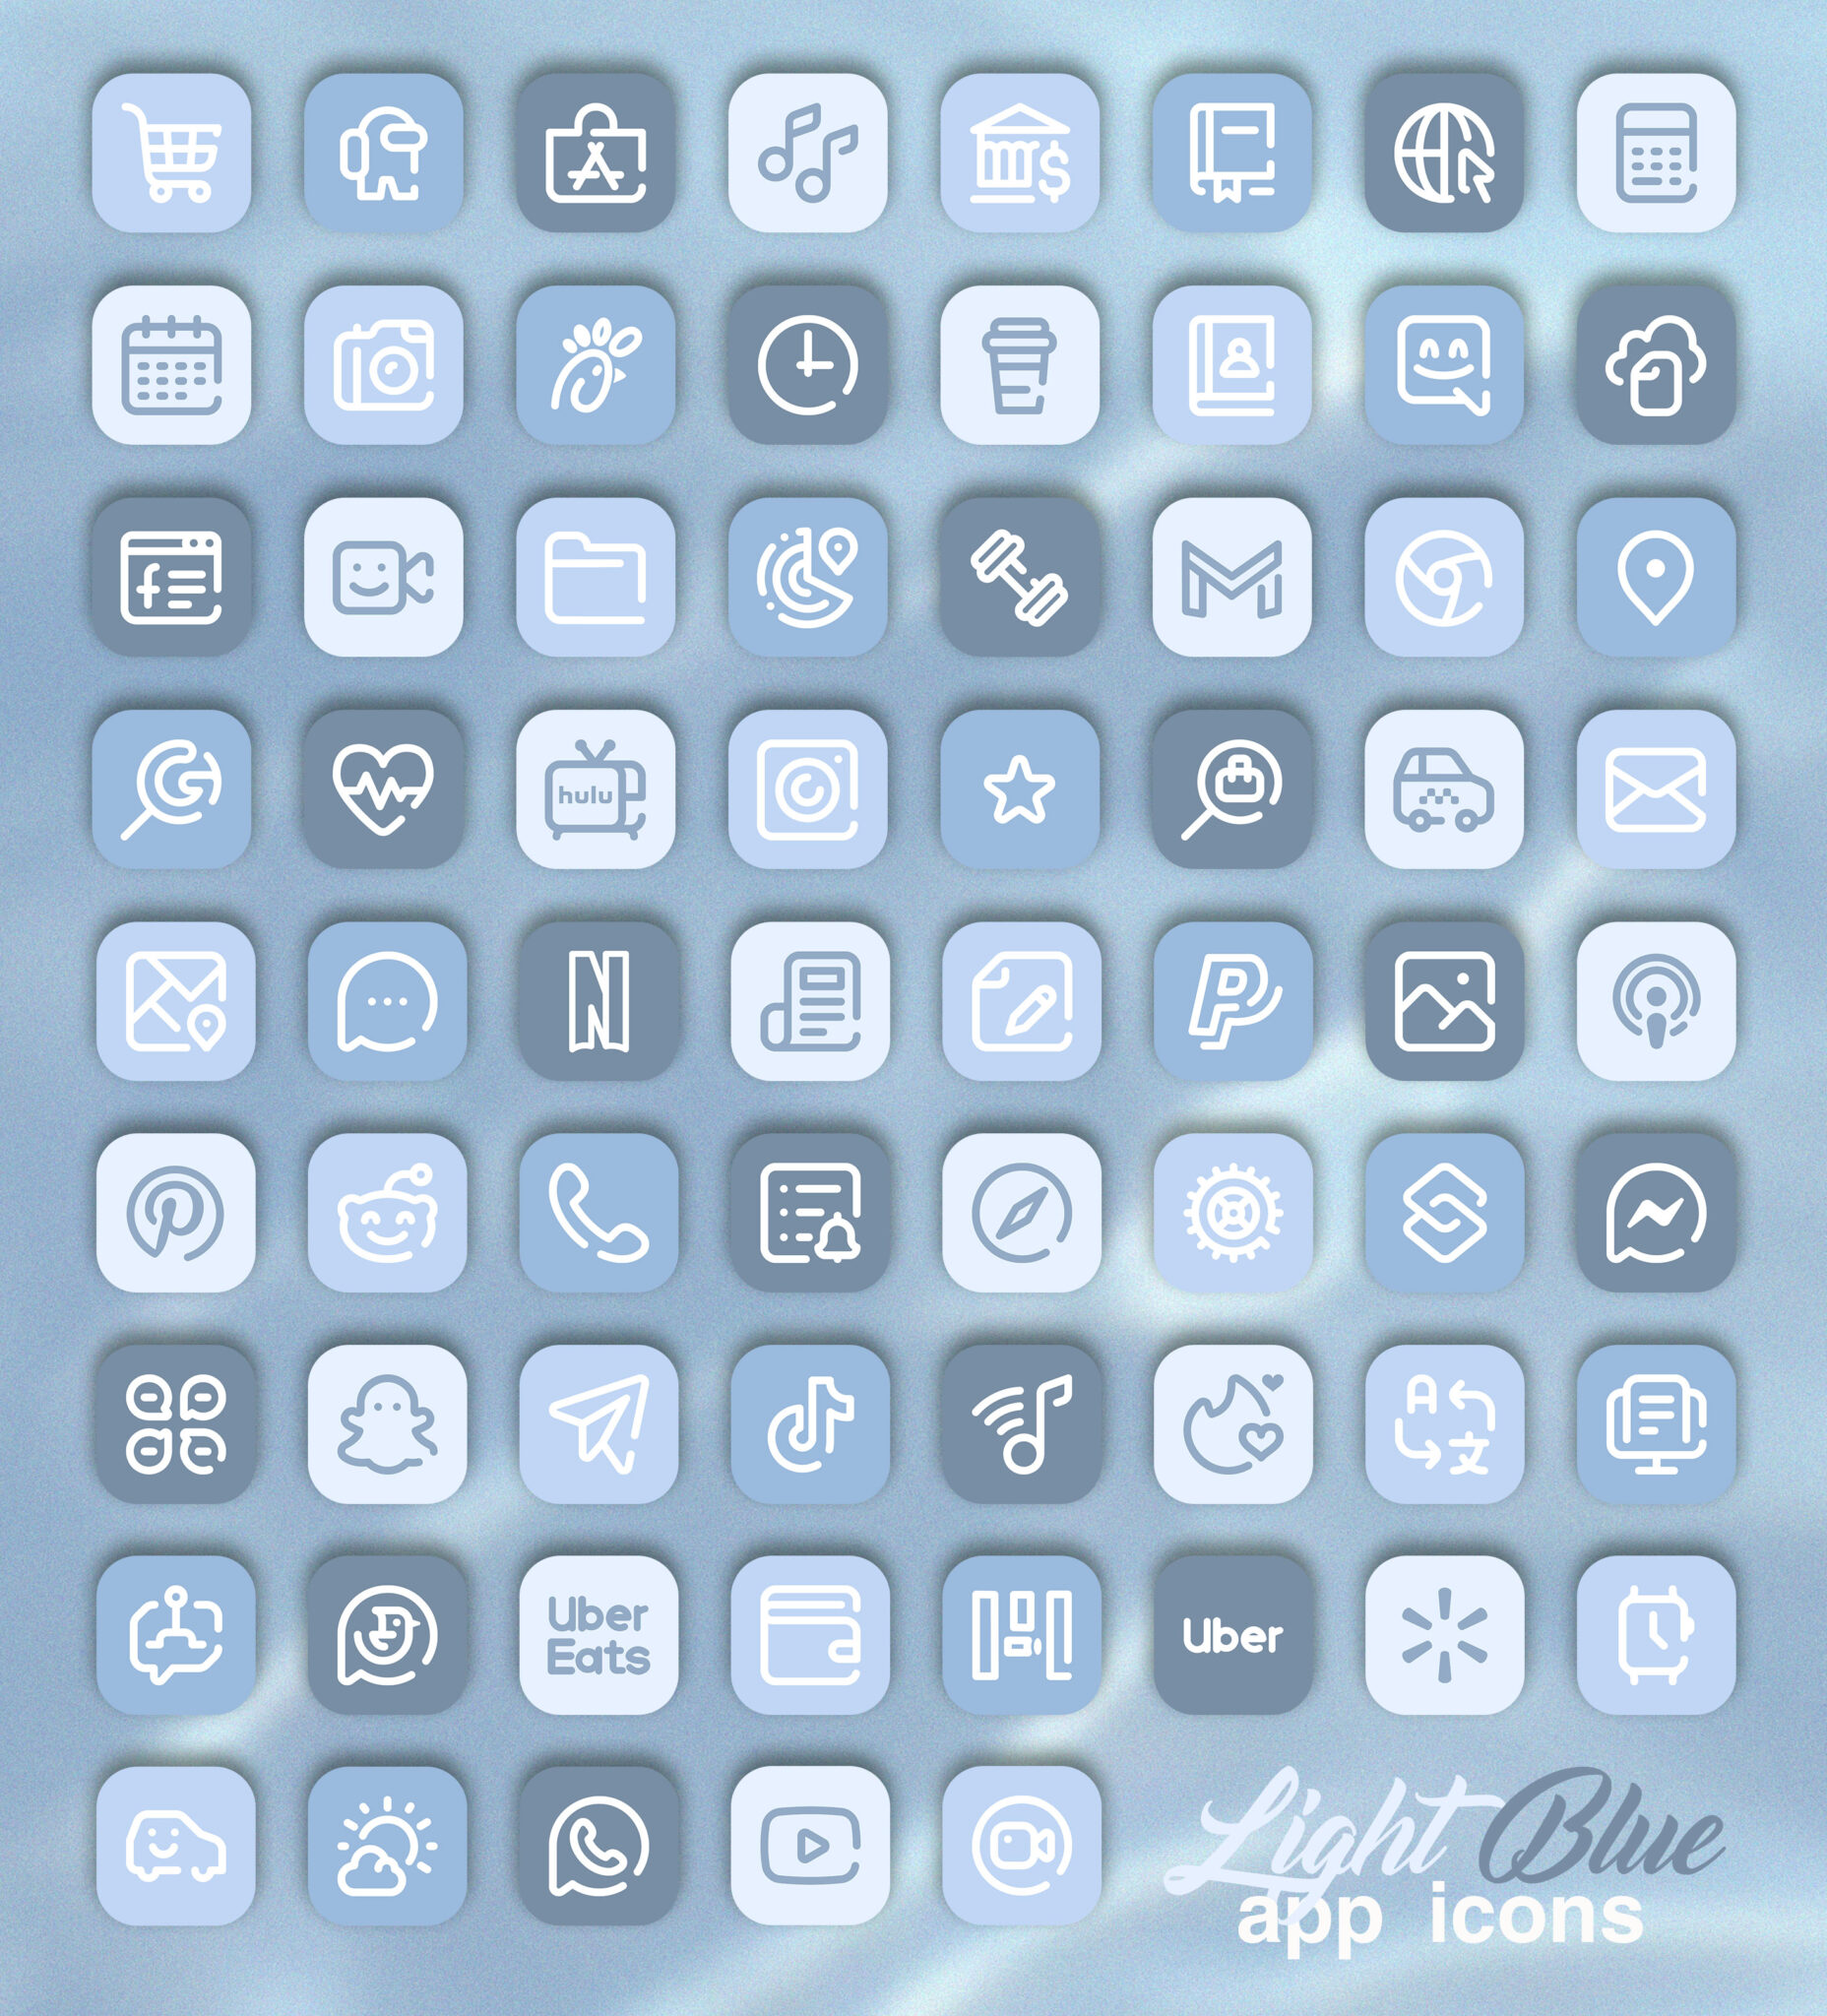 Light Blue App Icons for iOS 14 & Android - Free Aesthetic Baby Blue Icons